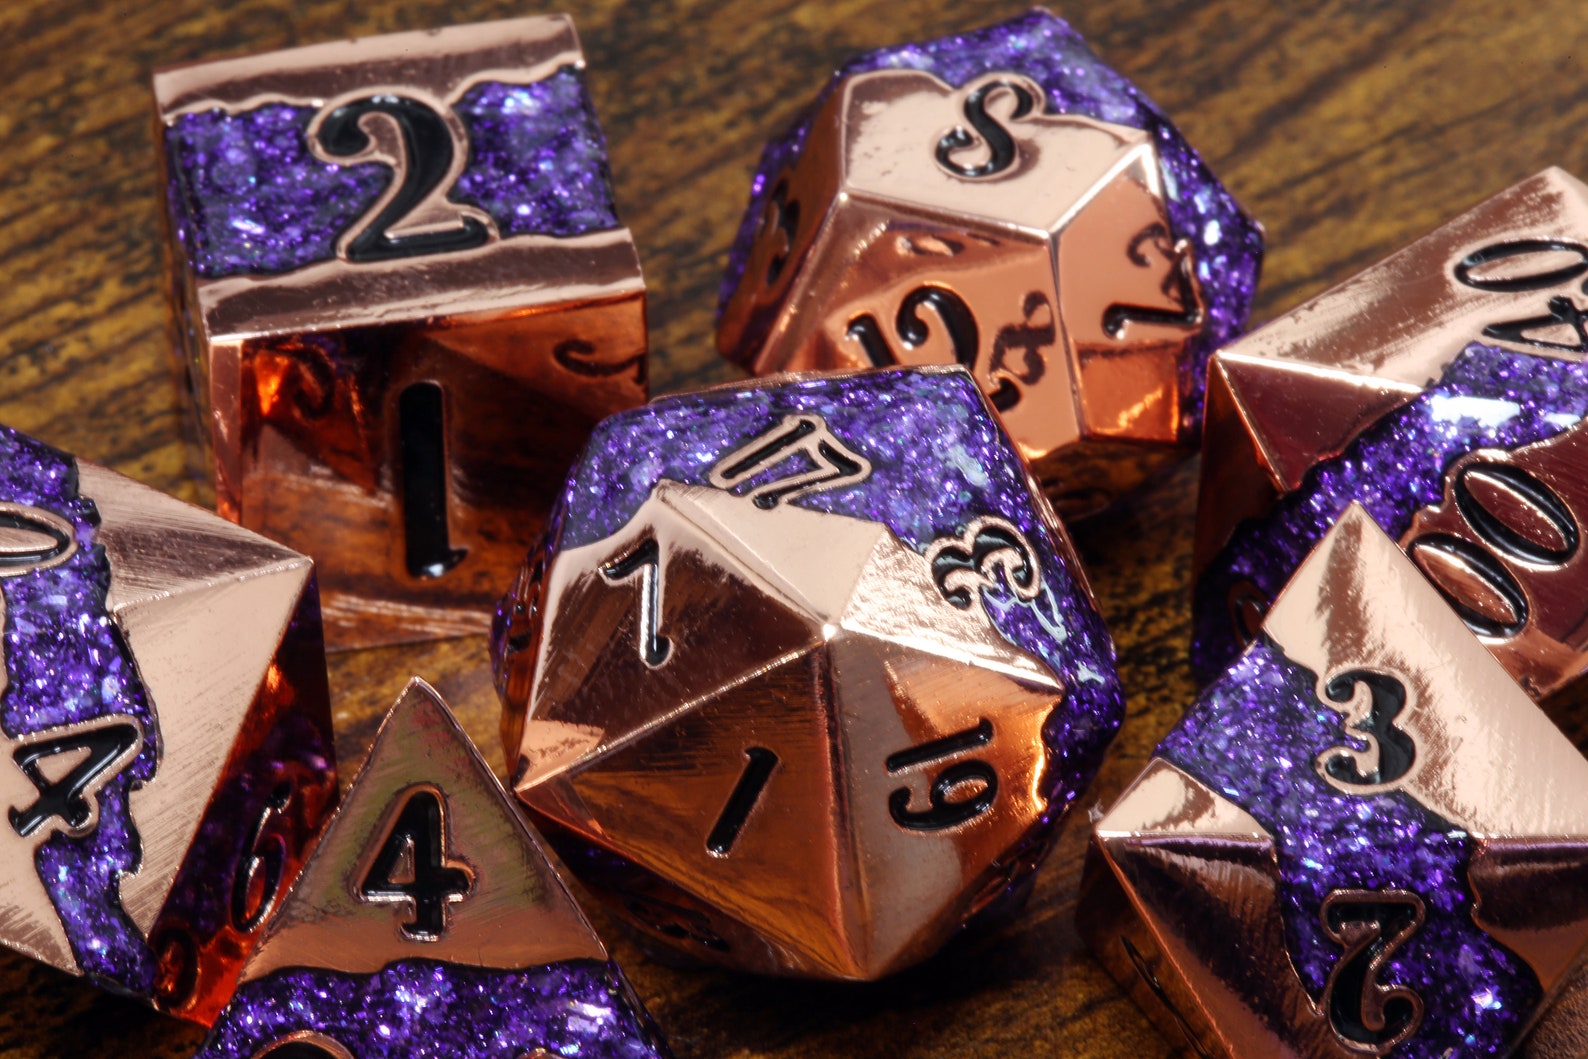 Mana Ore, Purple mica stripe dice set with shiny copper metal - The Wizard's Vault